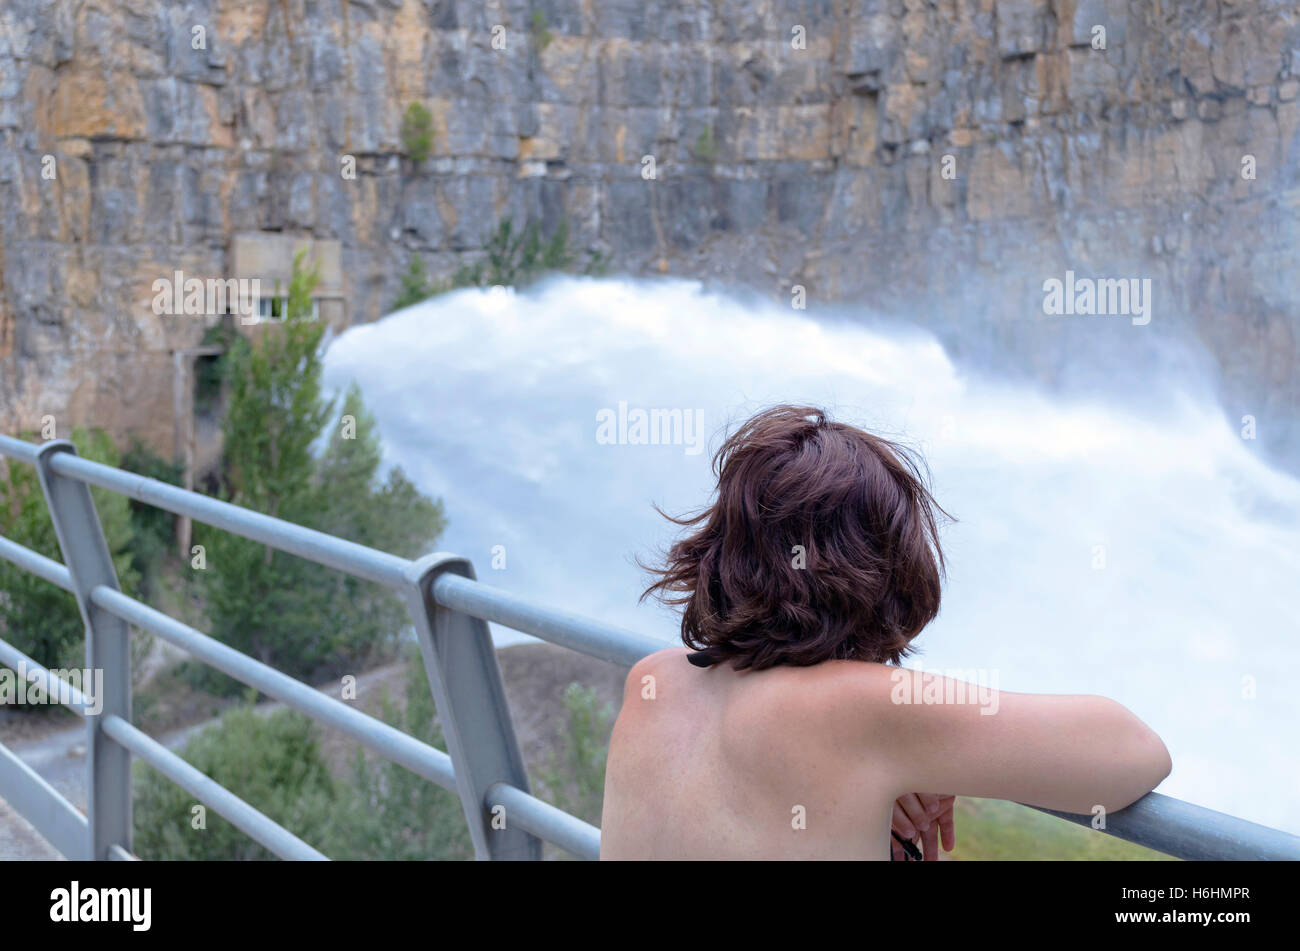 Woman looking at the water flowing through the spilway of Hydroelectric dam. Water falling strongly. Cloudy day. Stock Photo